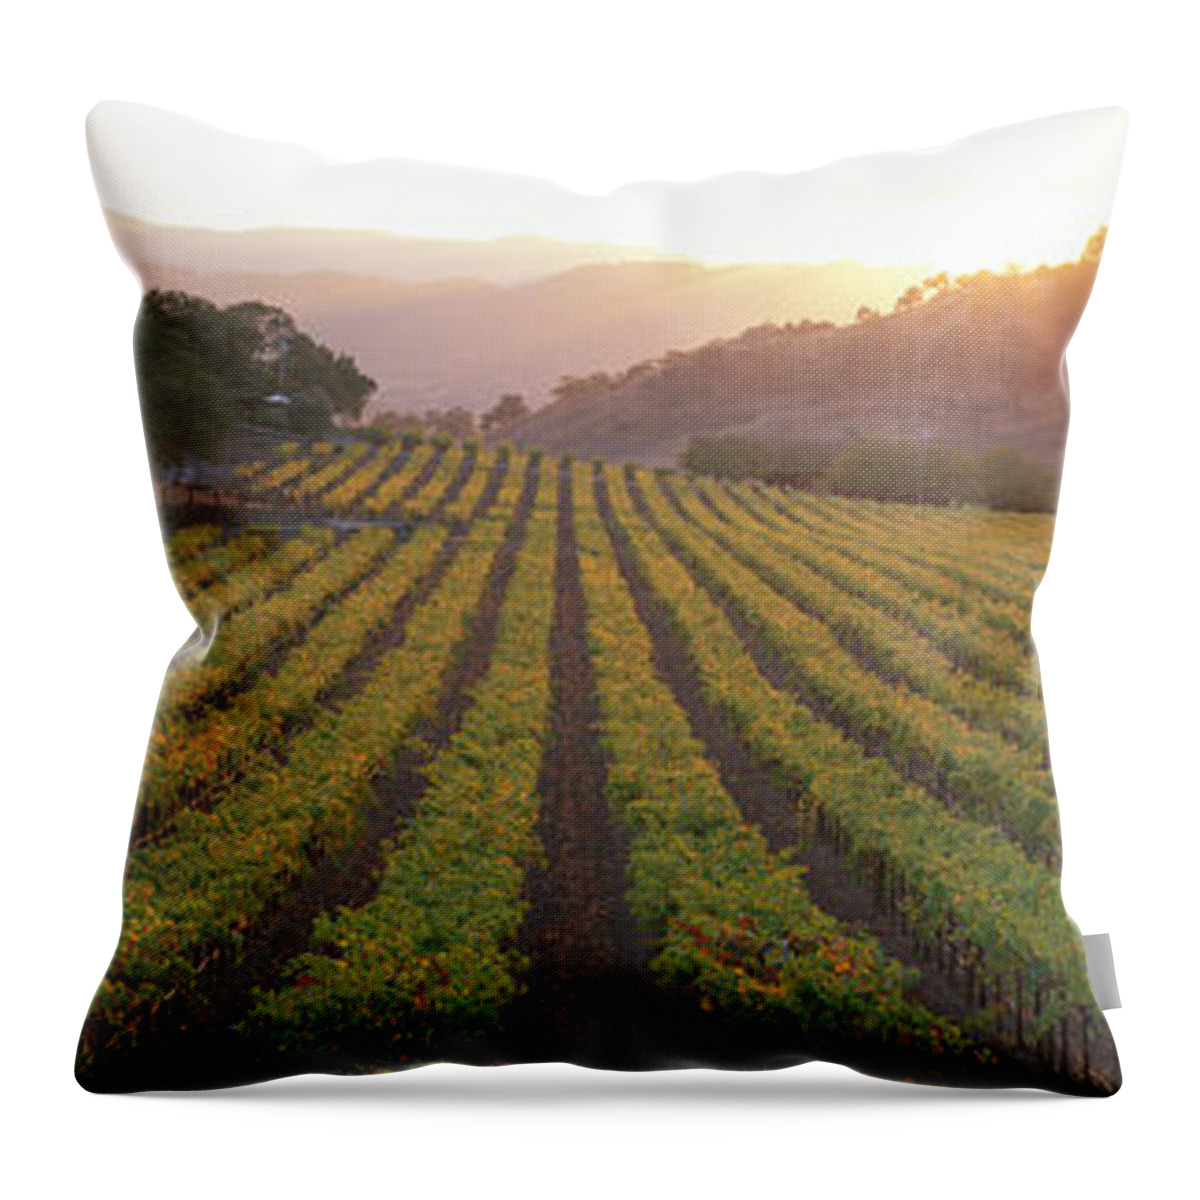 Photography Throw Pillow featuring the photograph Sunset, Vineyard, Napa Valley by Panoramic Images